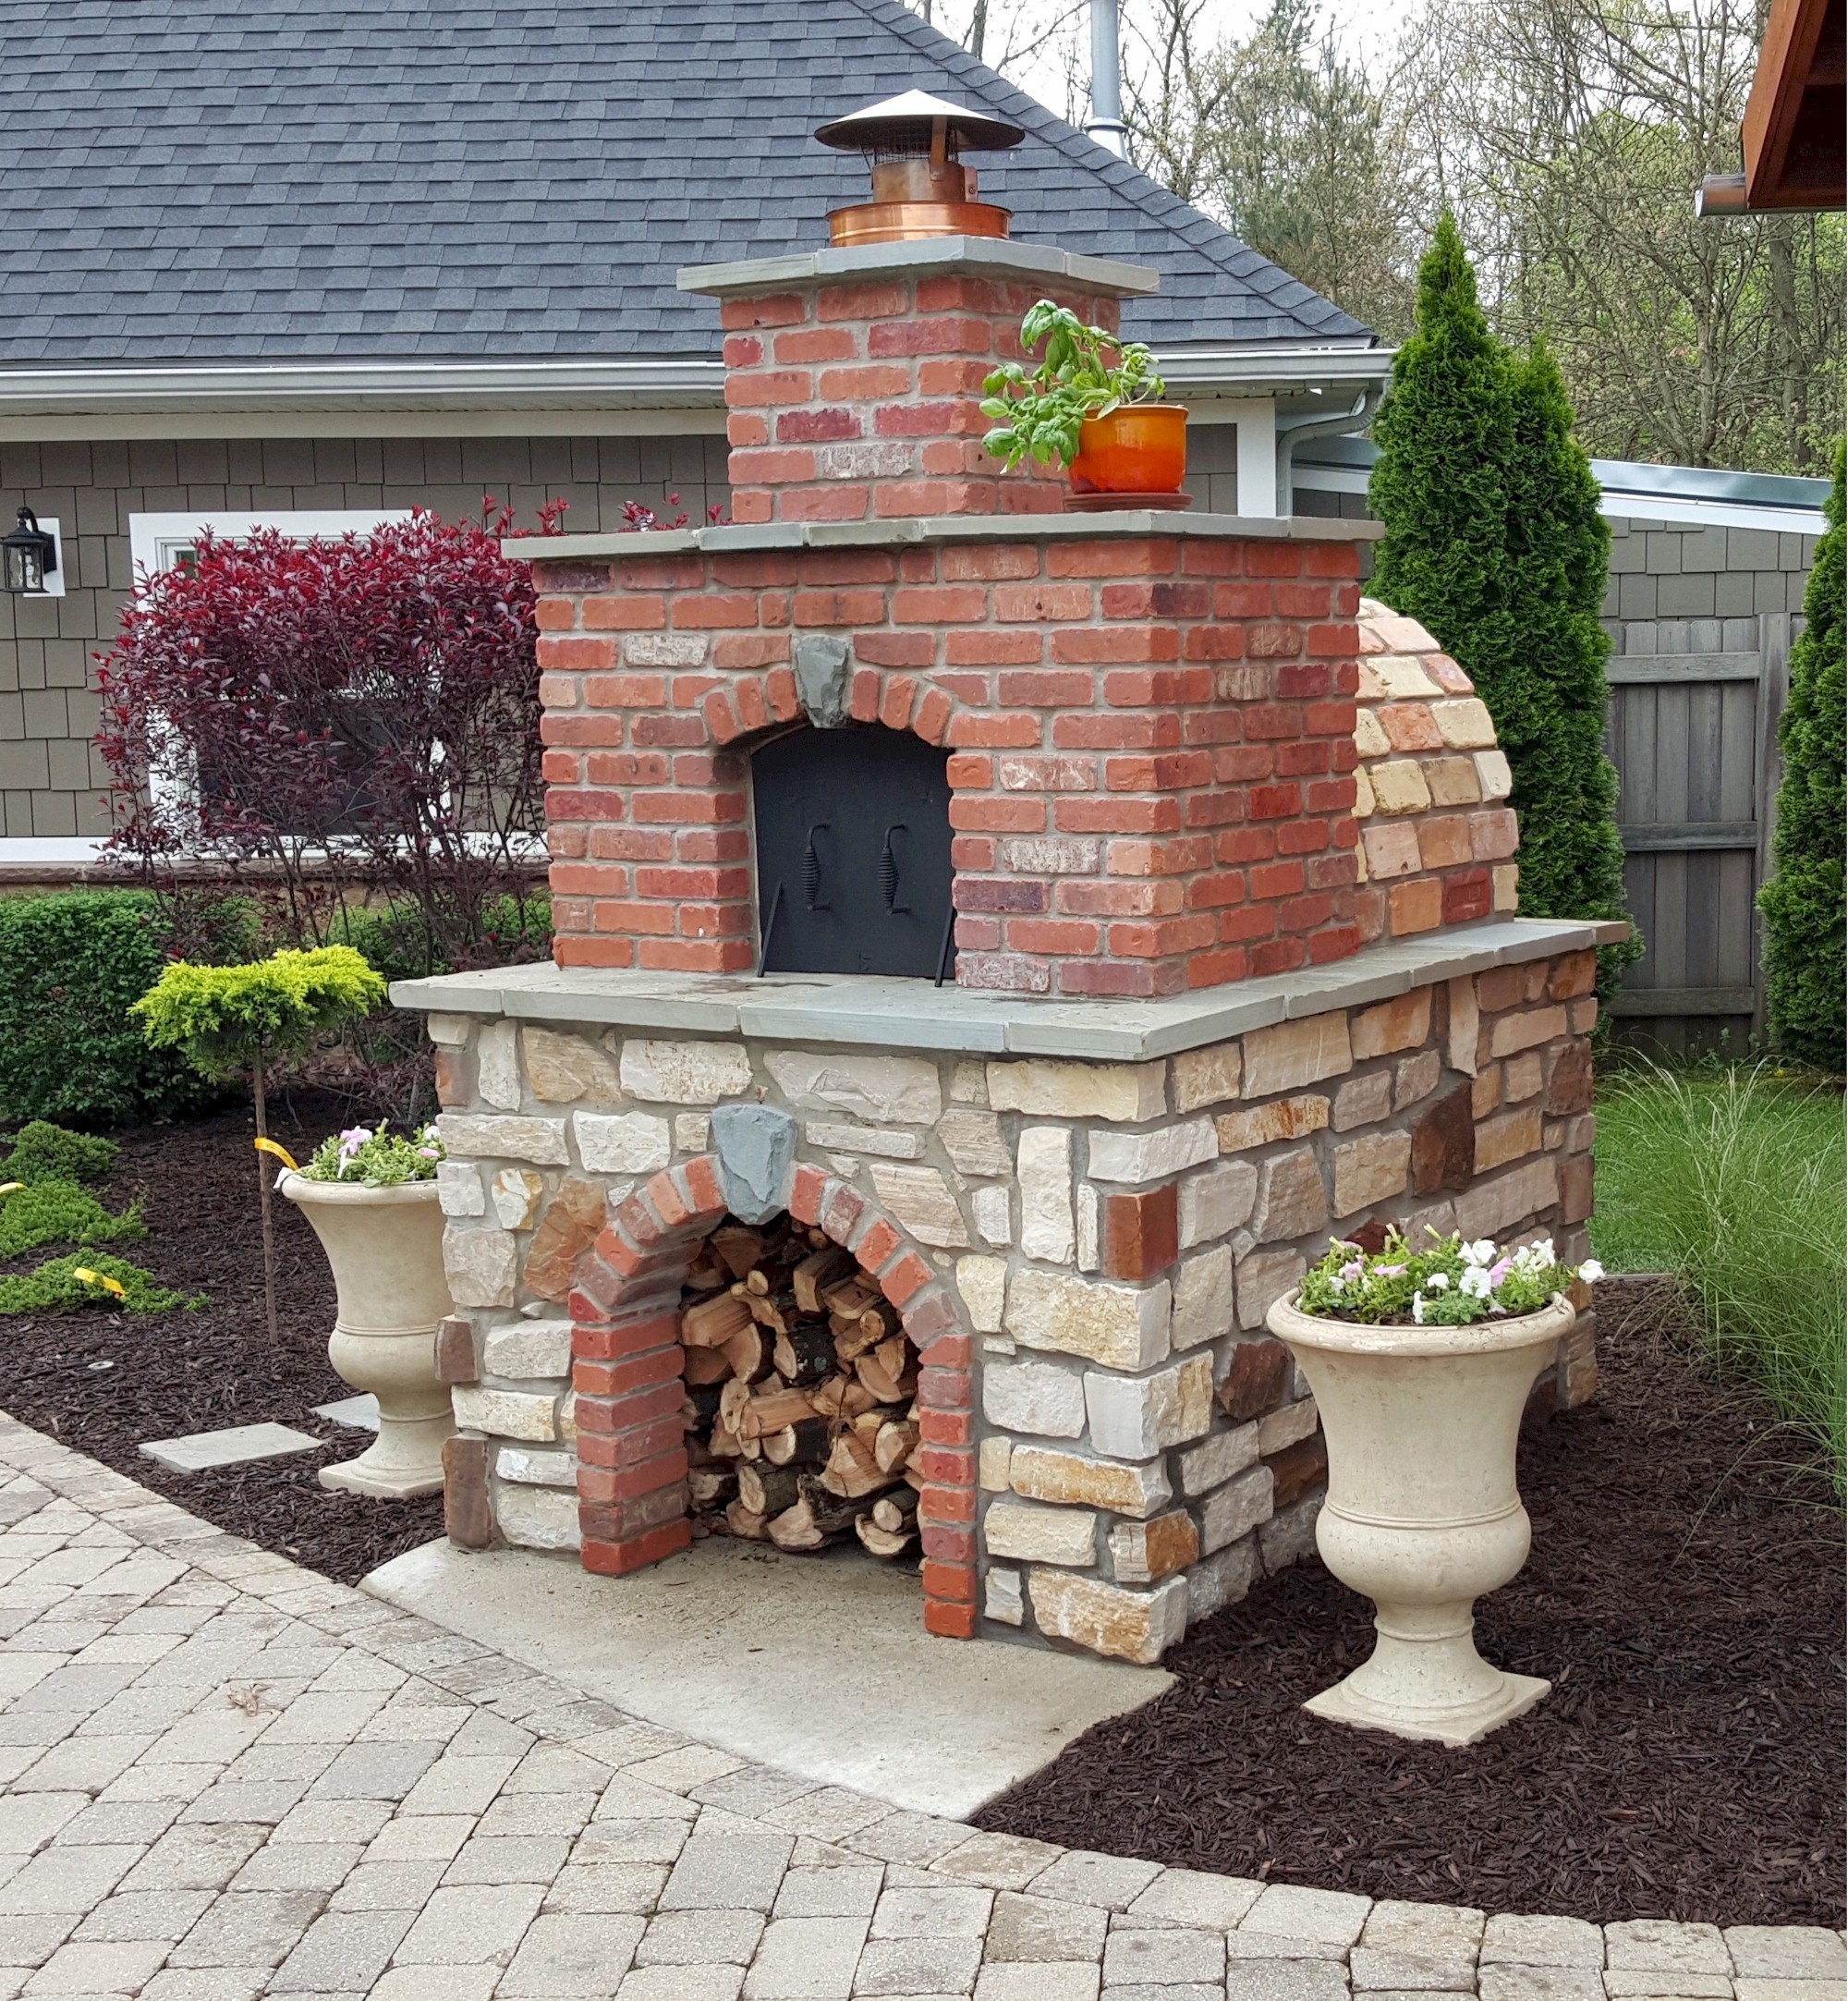 Diy Wood Fired Outdoor Brick Pizza Ovens Are Not Only Easy To Build They Add Incredible Property Value